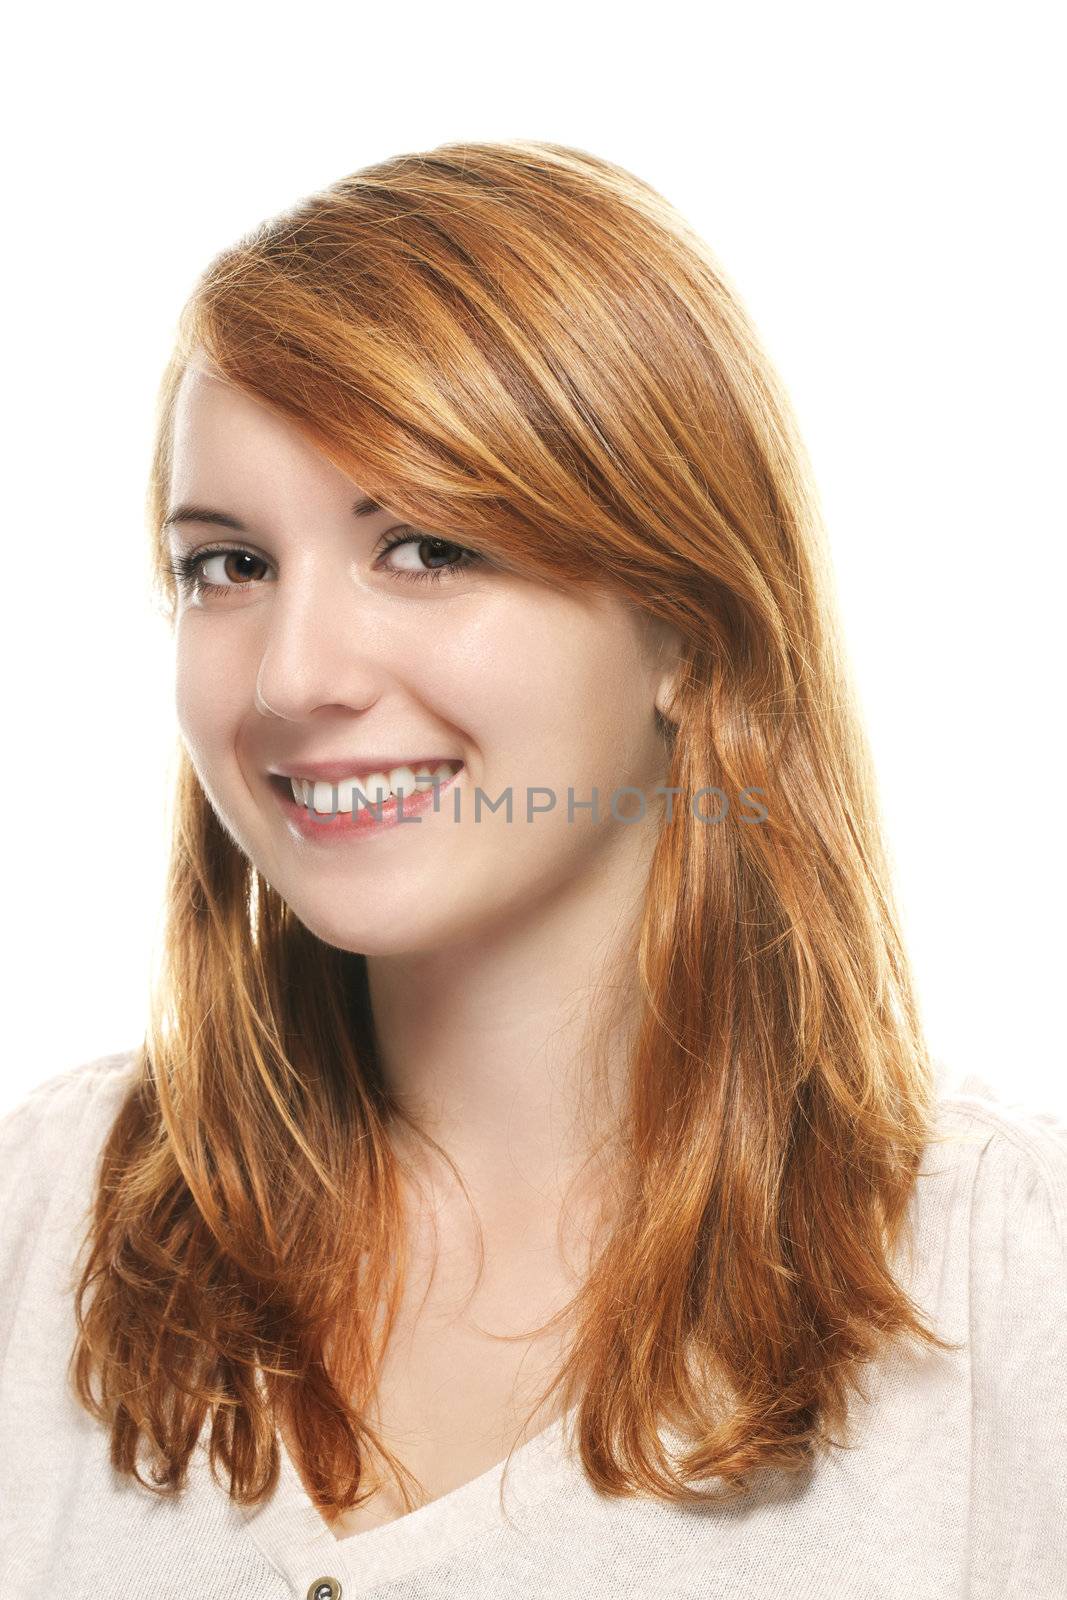 portrait of a young smiling redhead woman by RobStark